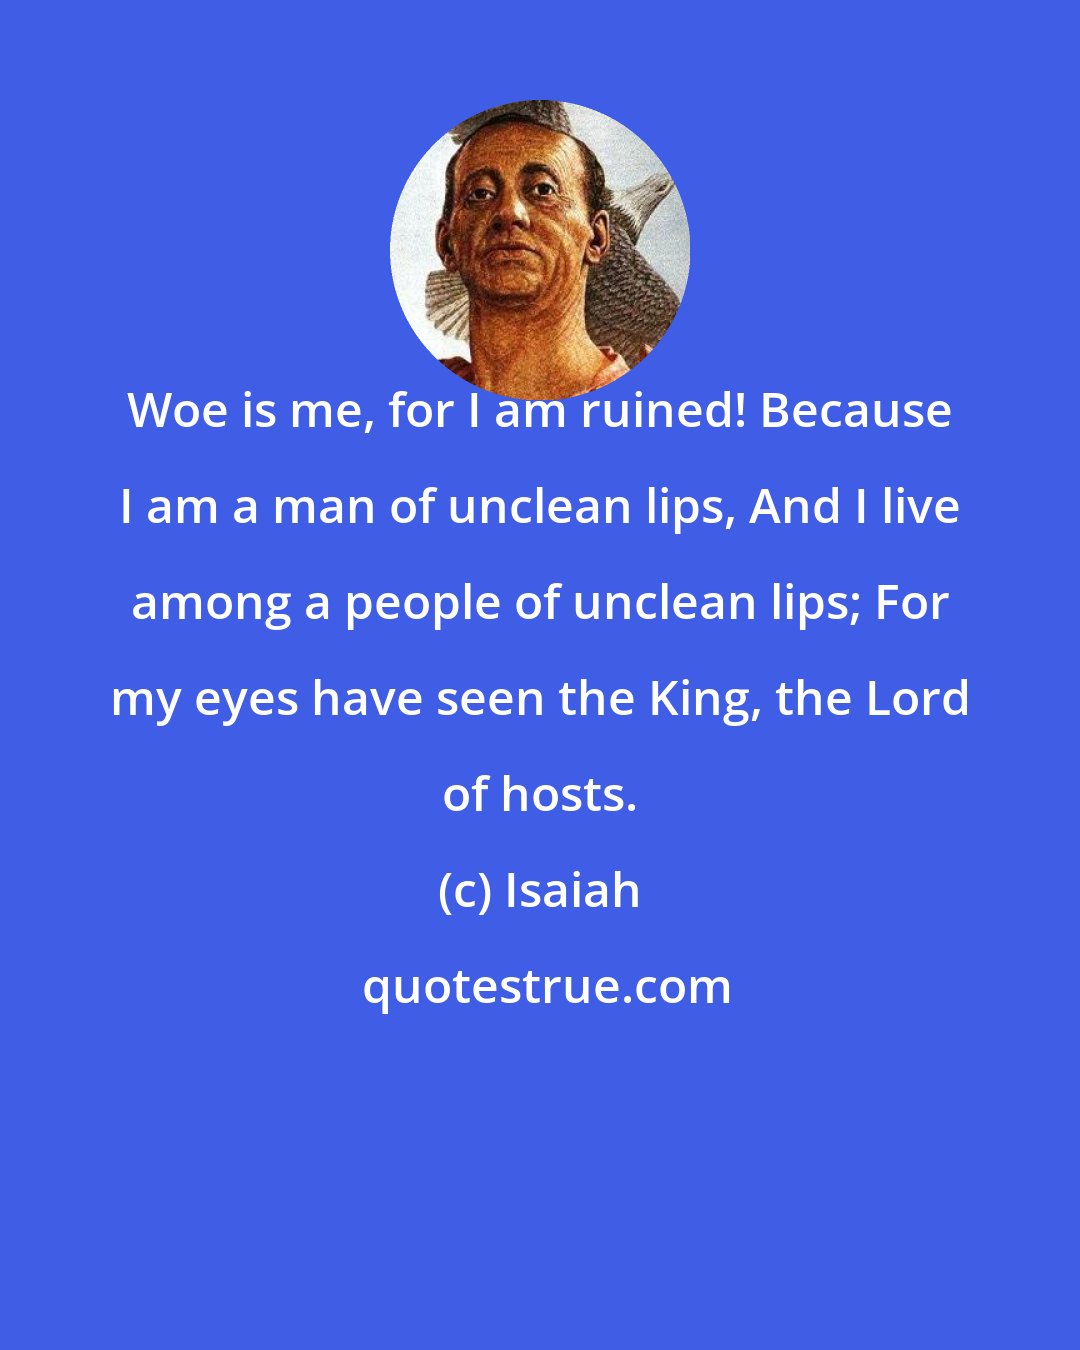 Isaiah: Woe is me, for I am ruined! Because I am a man of unclean lips, And I live among a people of unclean lips; For my eyes have seen the King, the Lord of hosts.